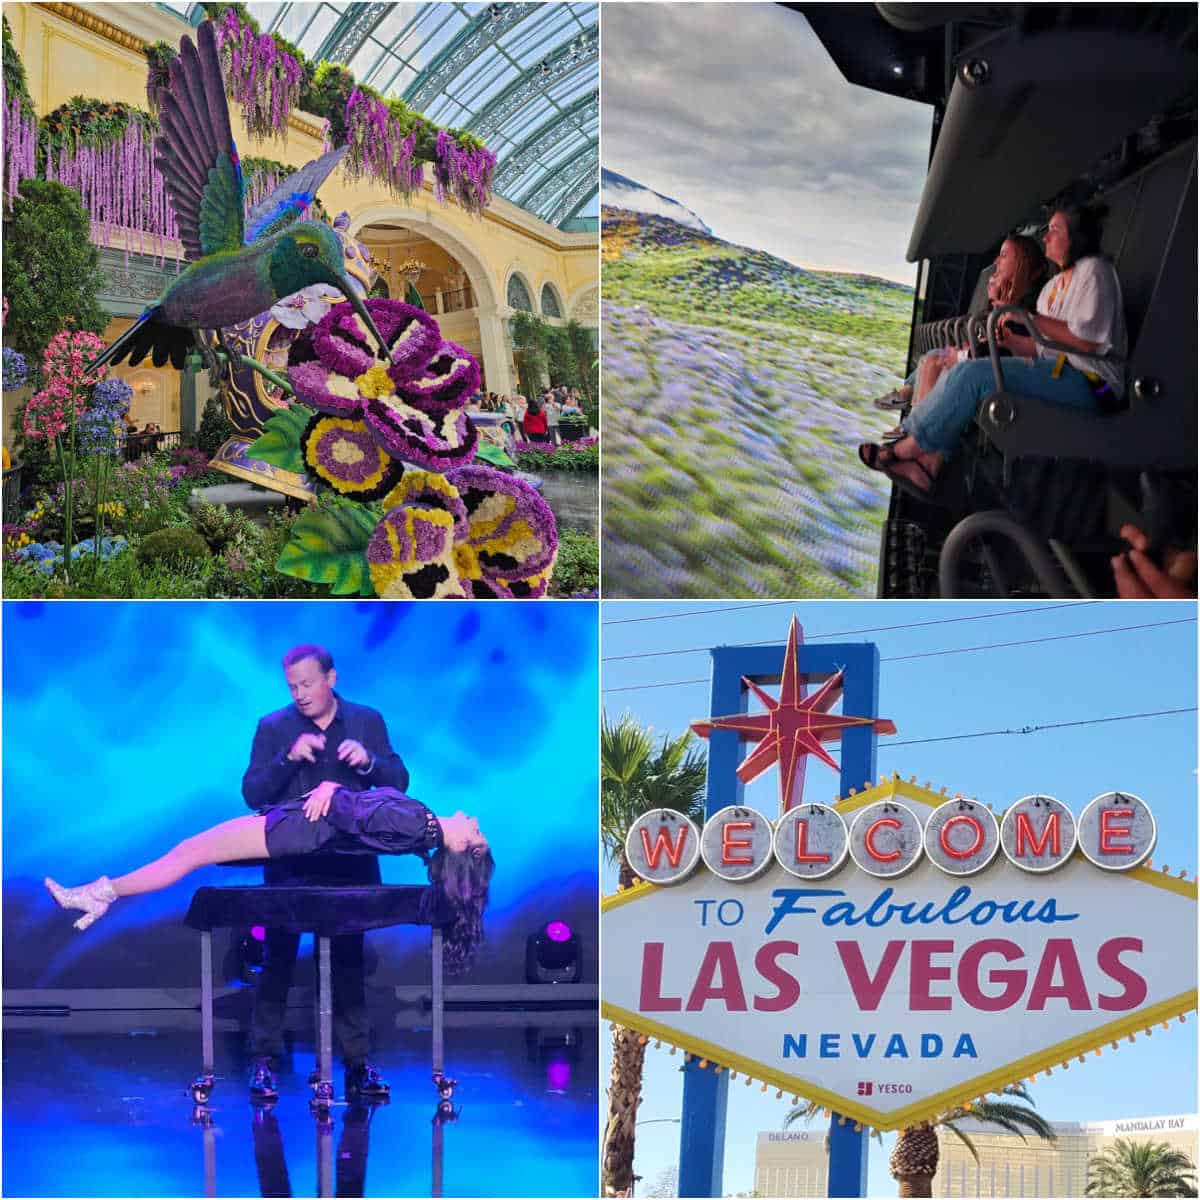 Collage of unique things to do in las vegas with flower gardens, flyover las vegas, nathan burton magic show, and the vegas sign